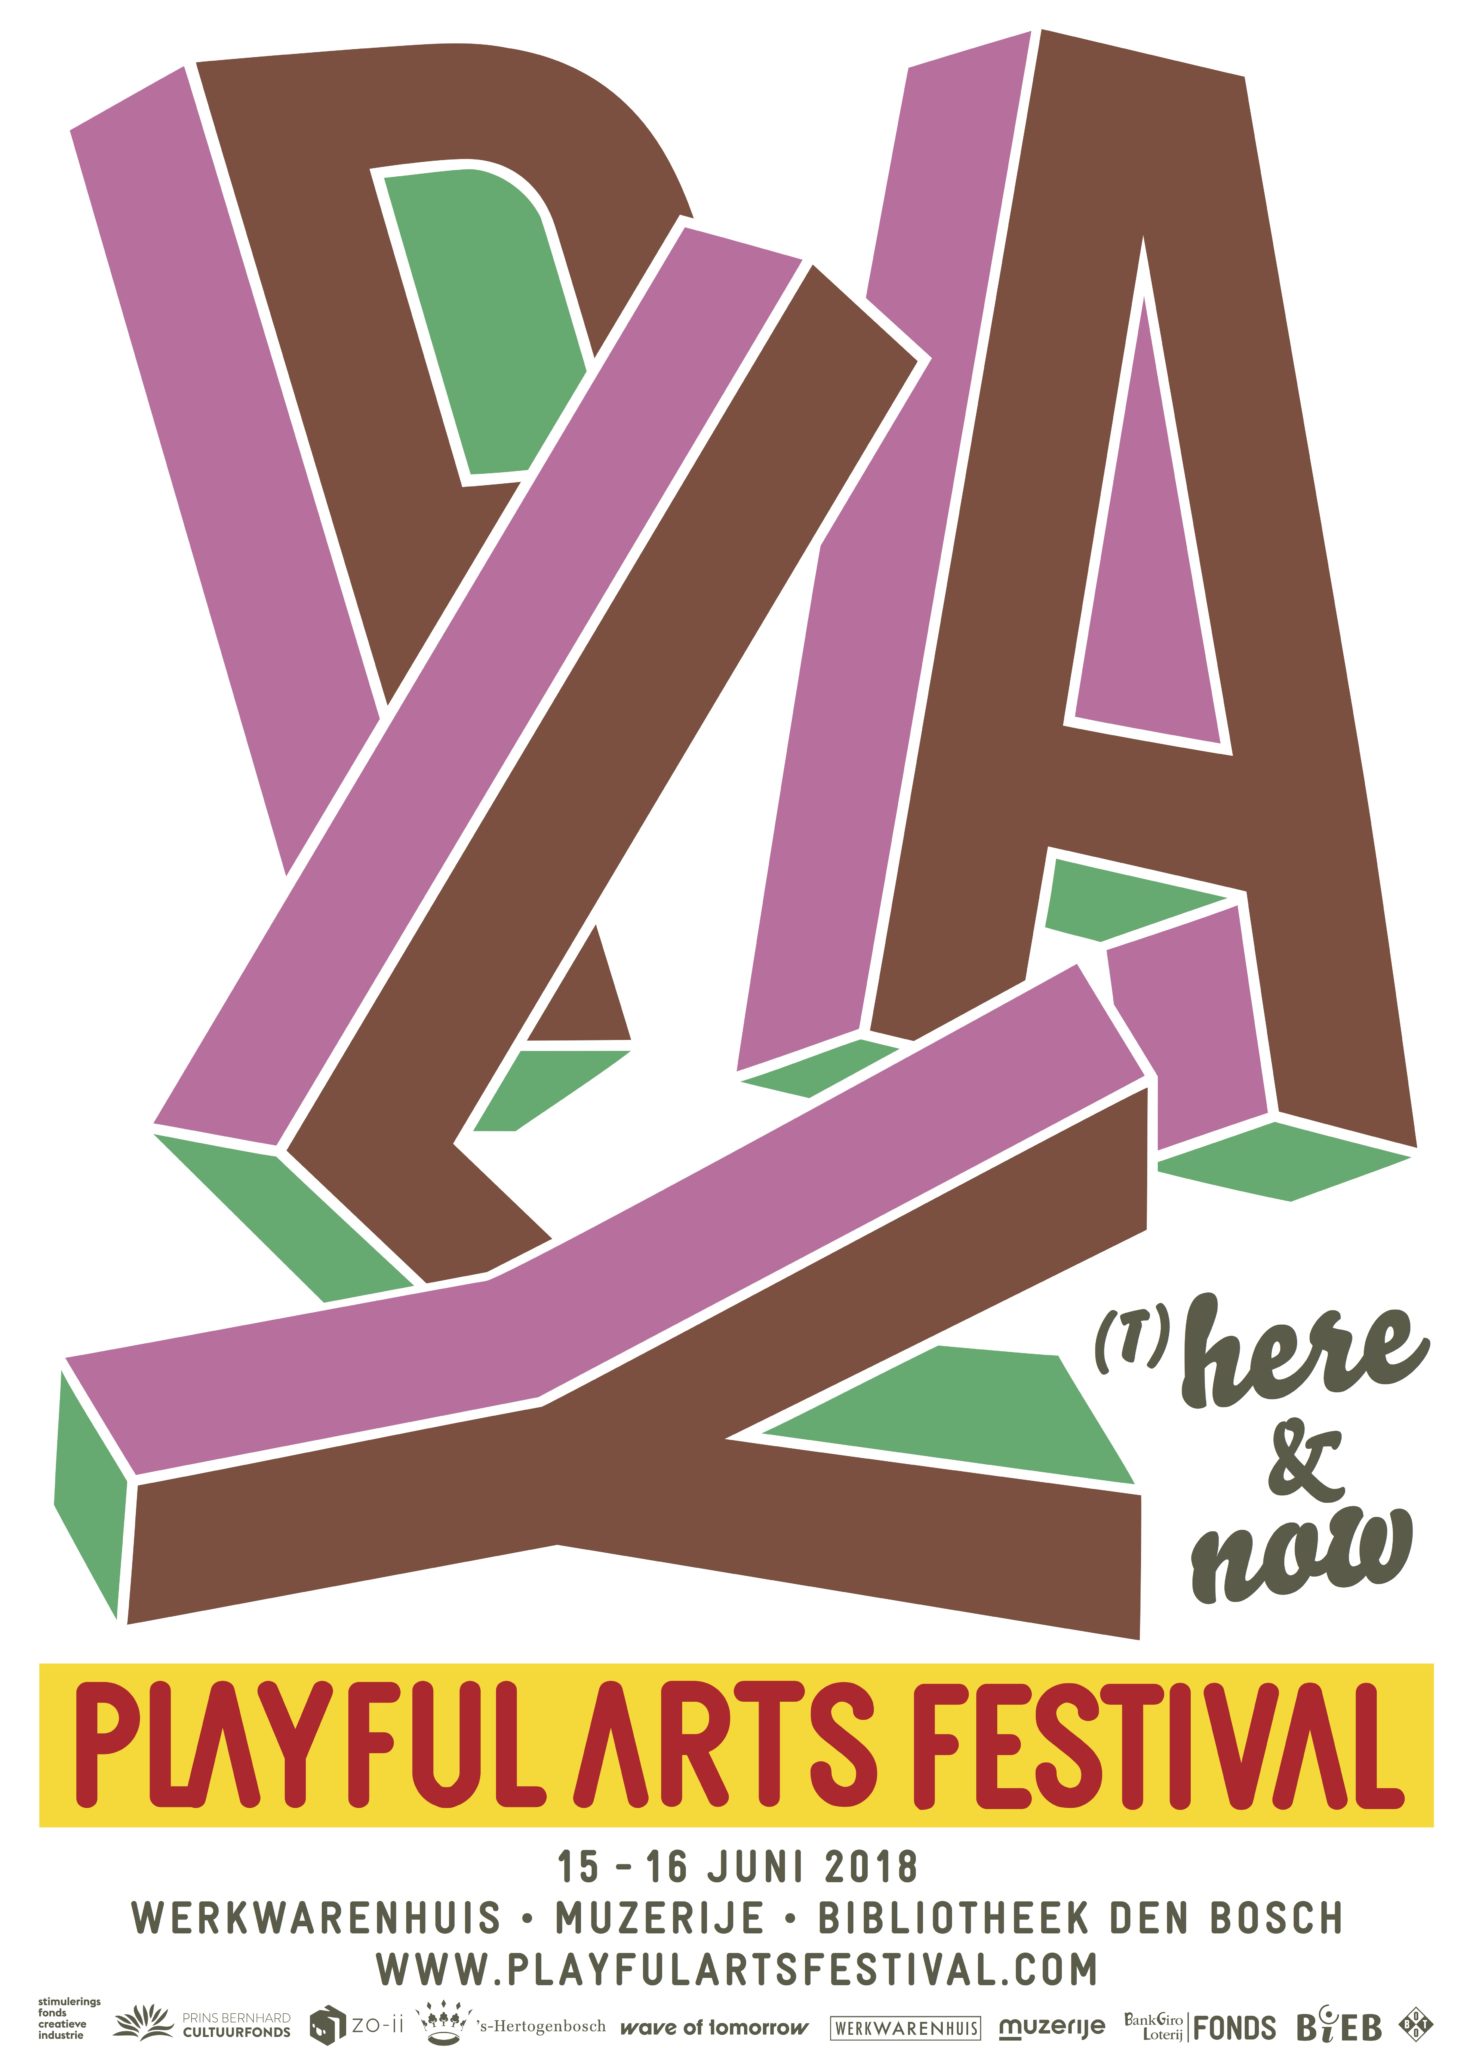 Playful Arts Festival was here